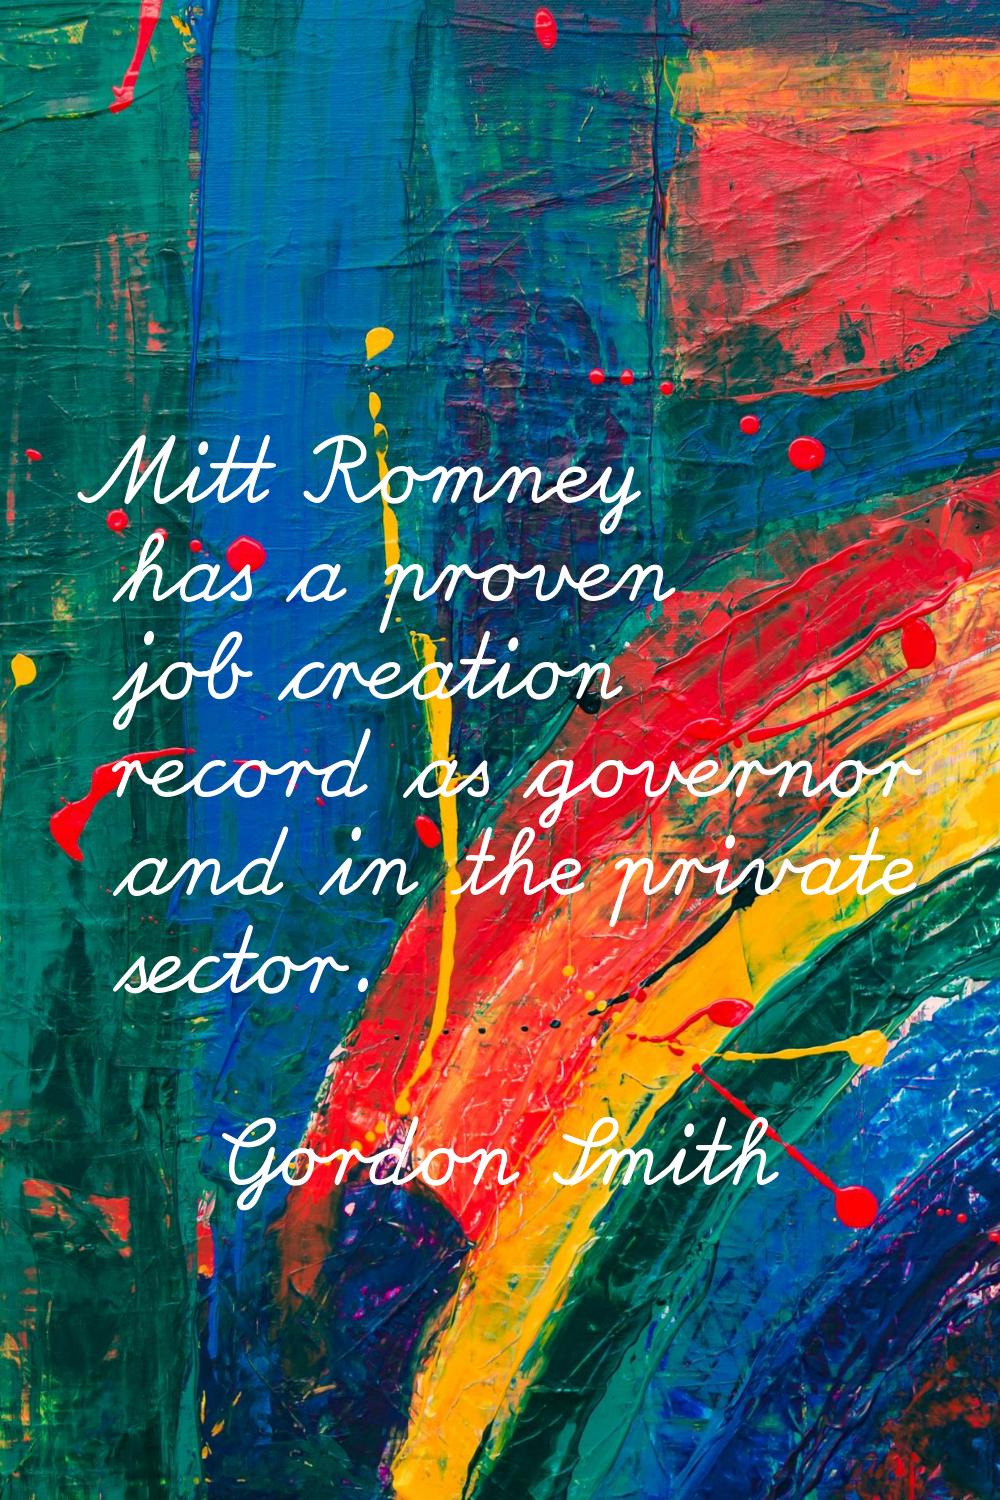 Mitt Romney has a proven job creation record as governor and in the private sector.